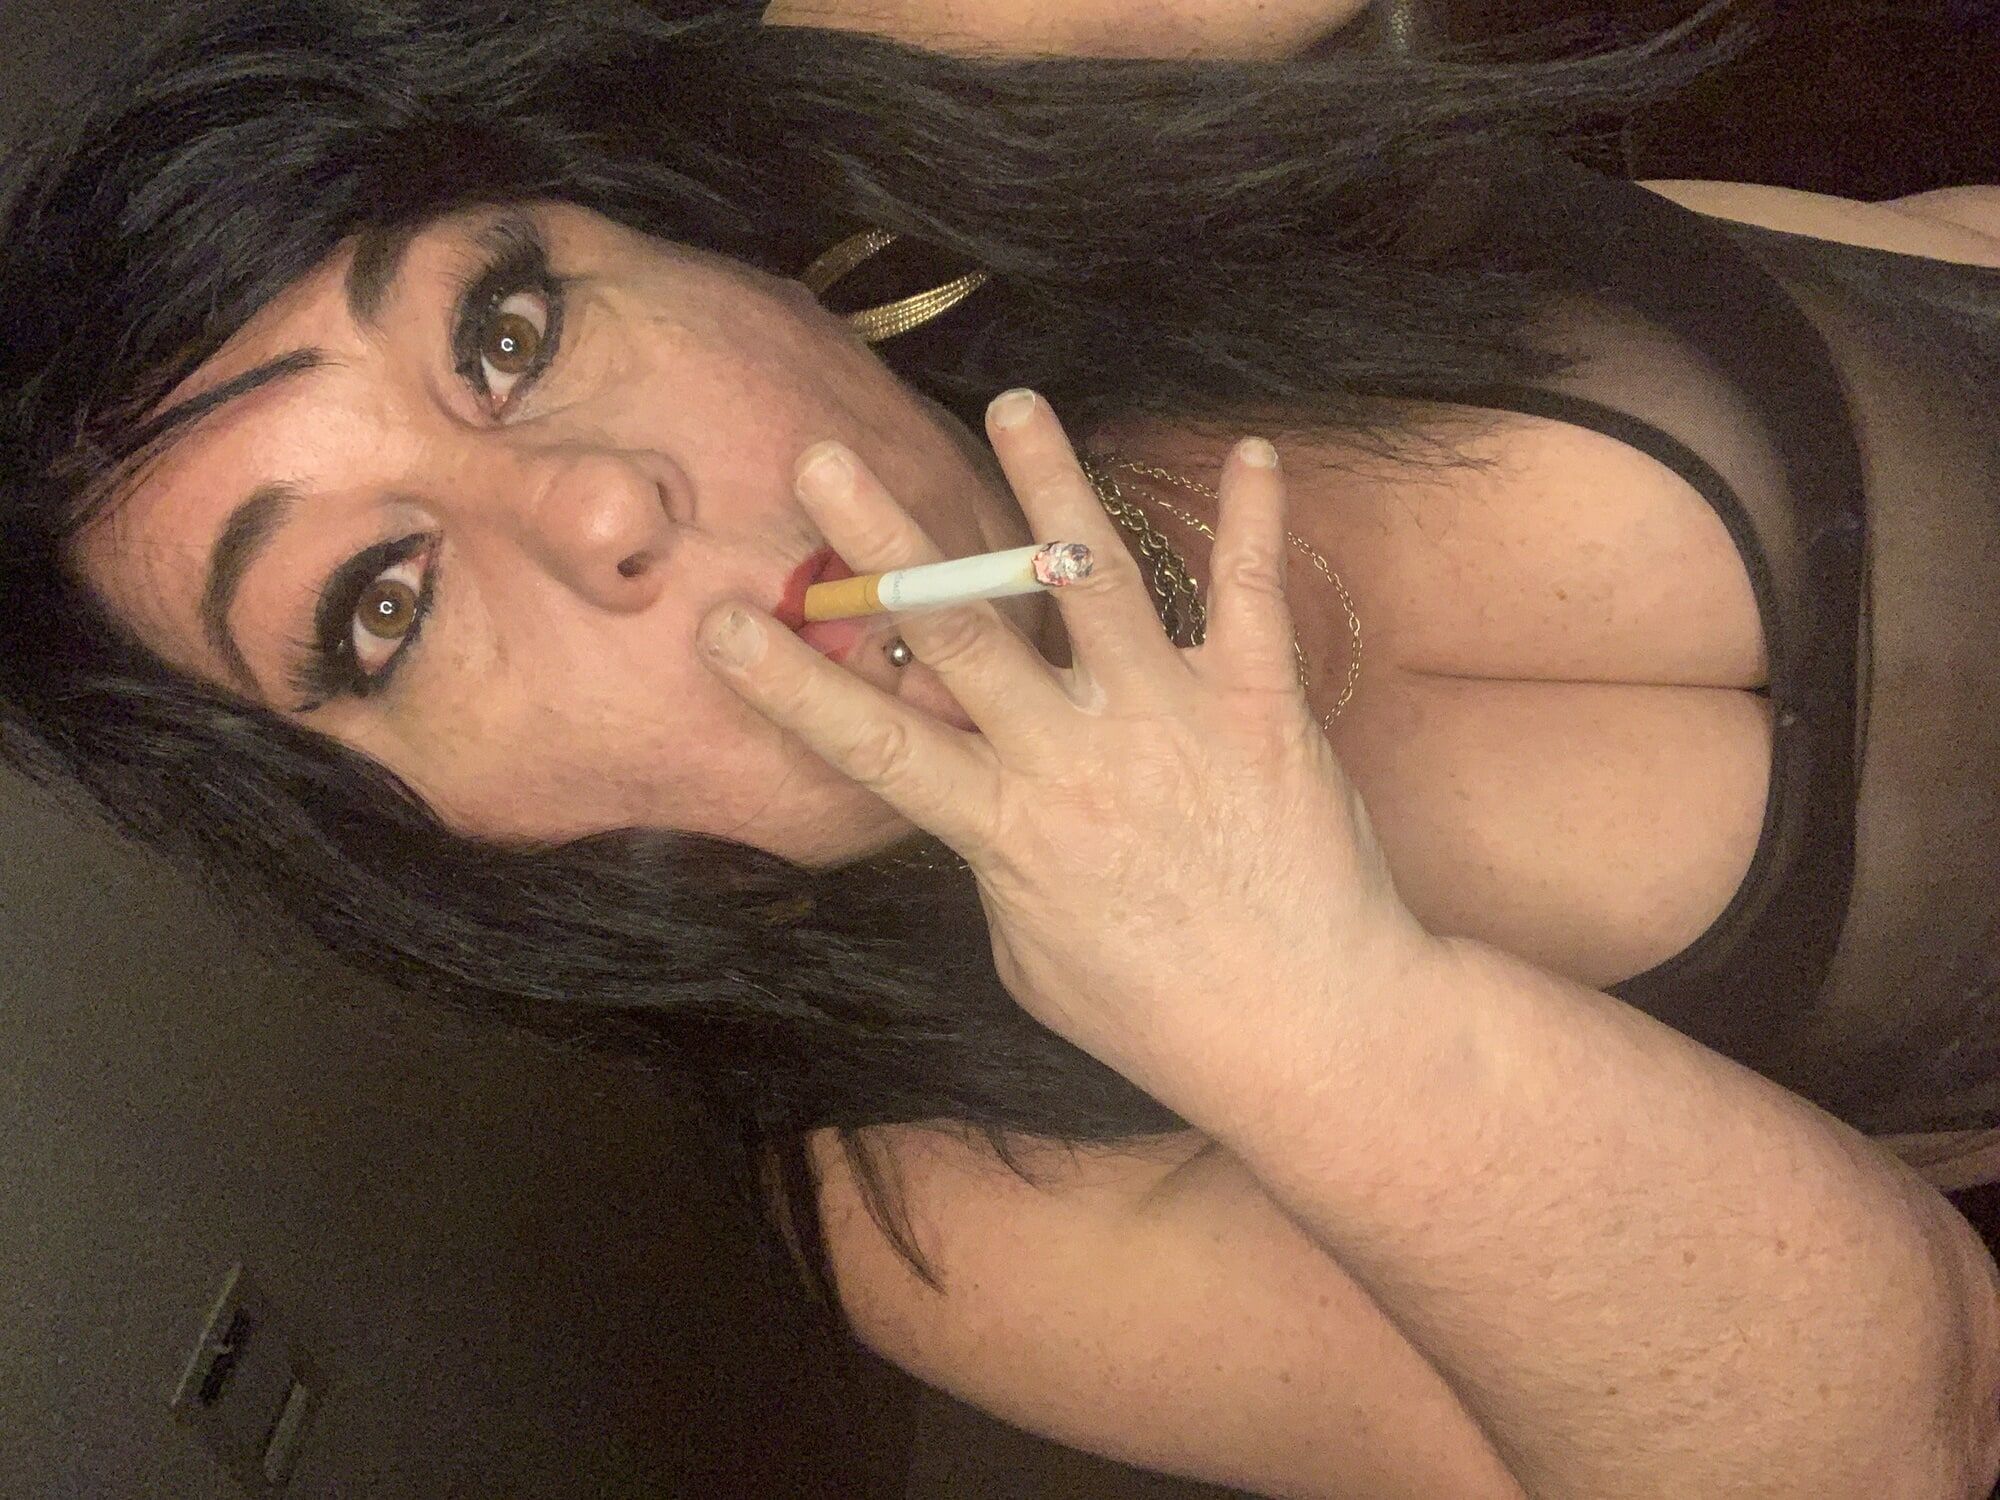 Mommy looks hot smoking #5